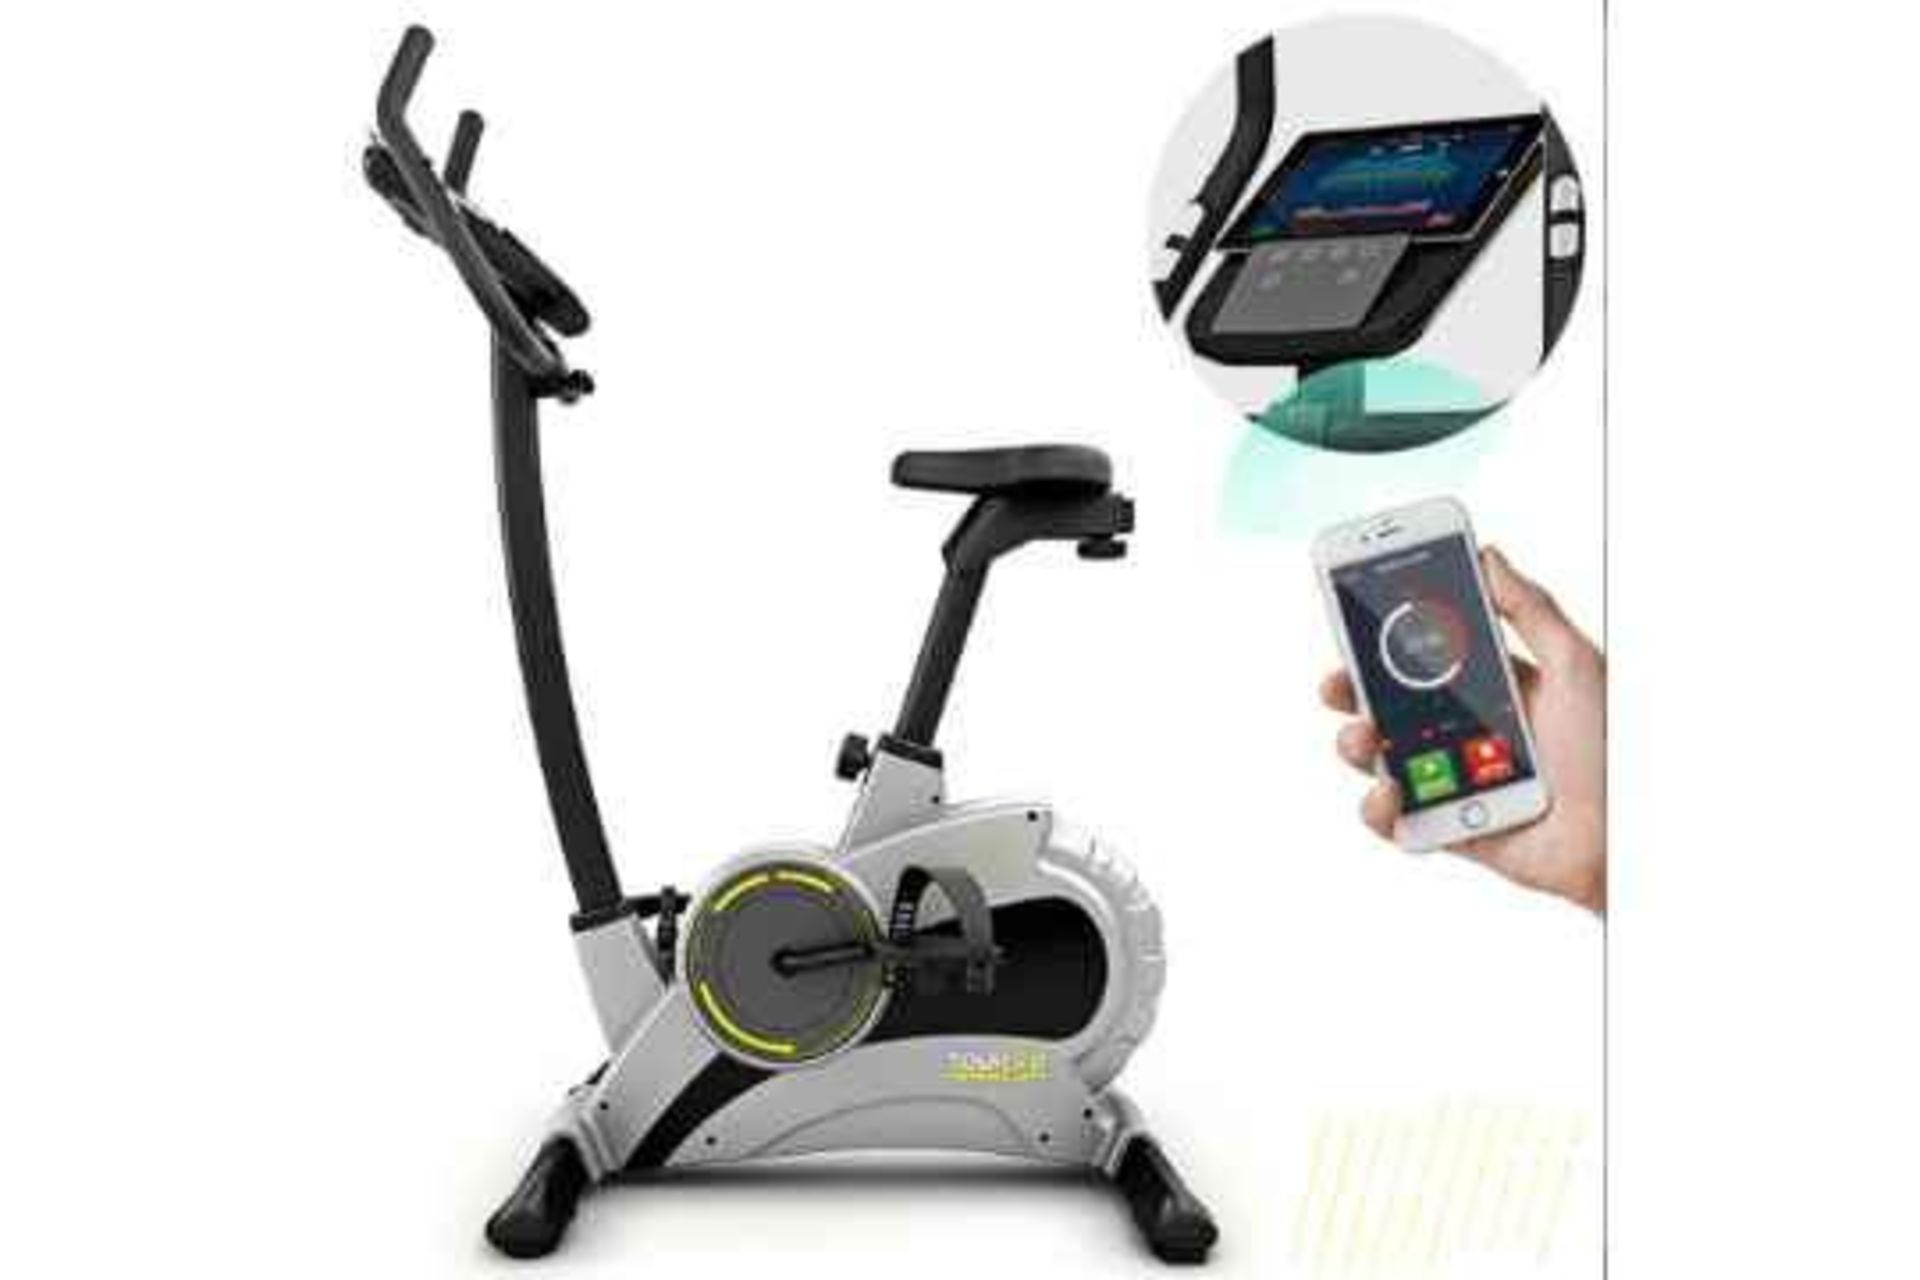 BLUEFIN FITNESS TOUR 5.0 RESISTANCE EXERCISE BIKE RRP £349.00 - Image 6 of 7